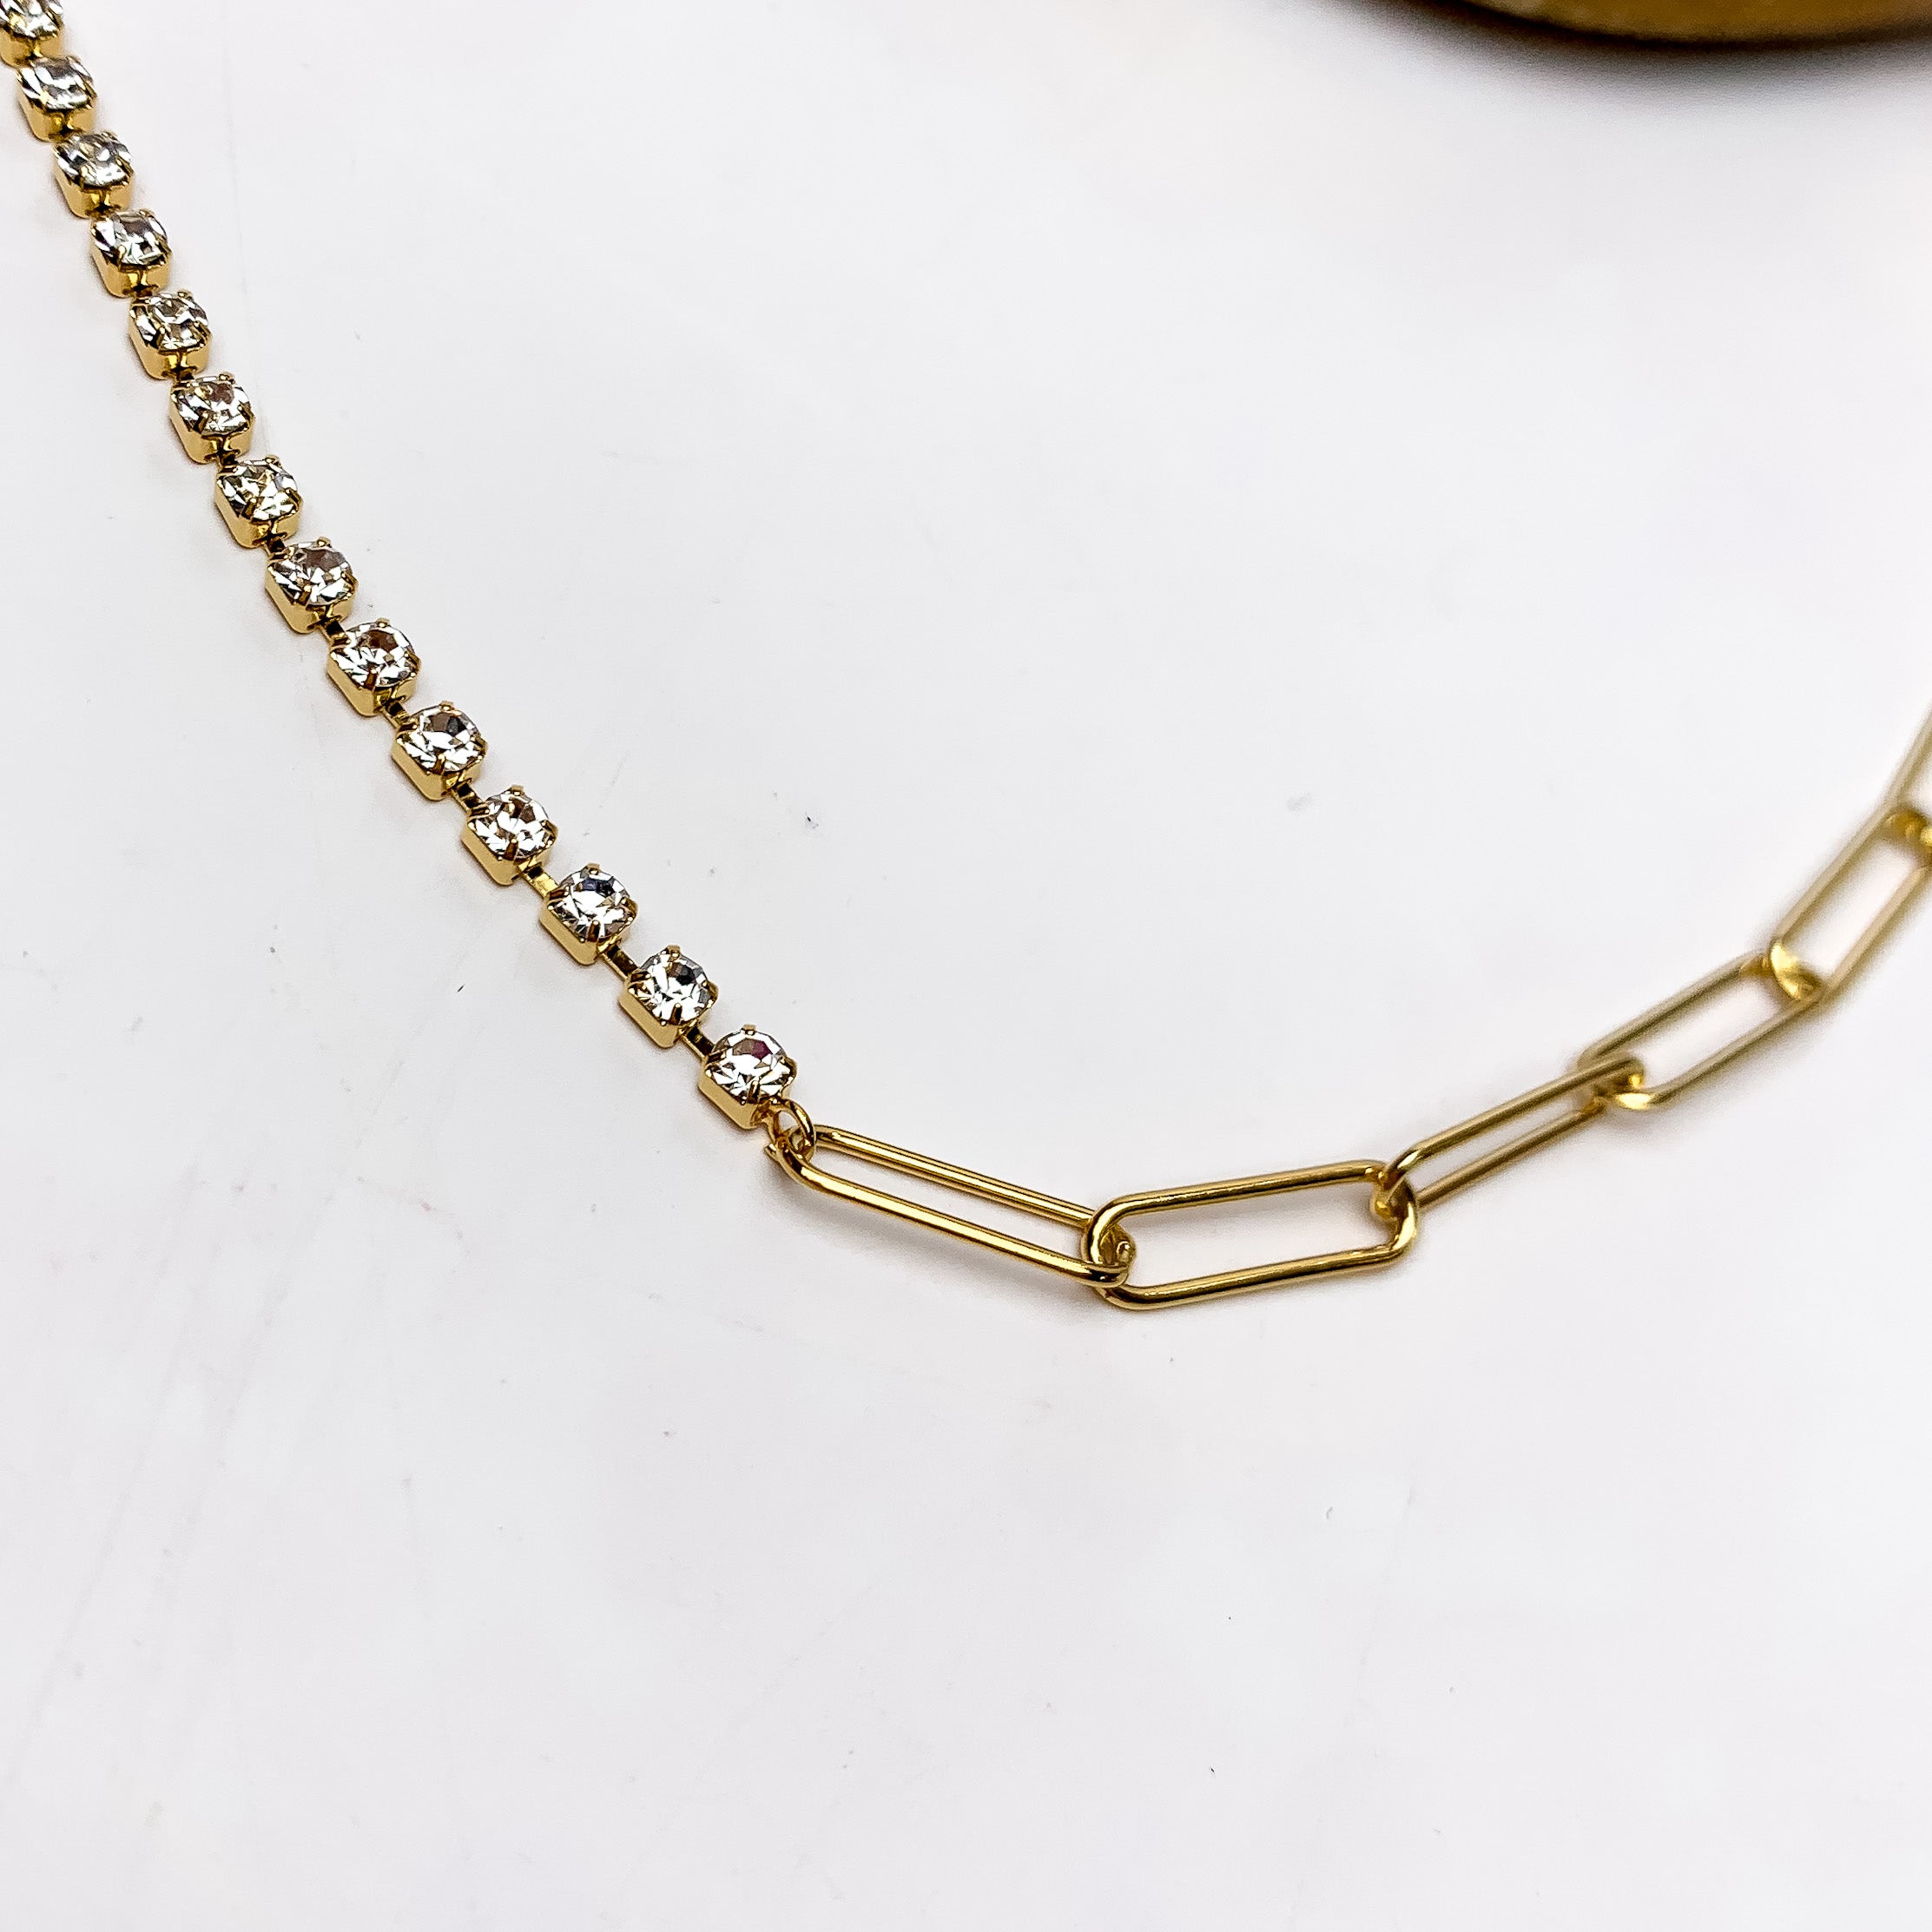 Drama Queen Gold Tone Necklace With Clear Crystals - Giddy Up Glamour Boutique